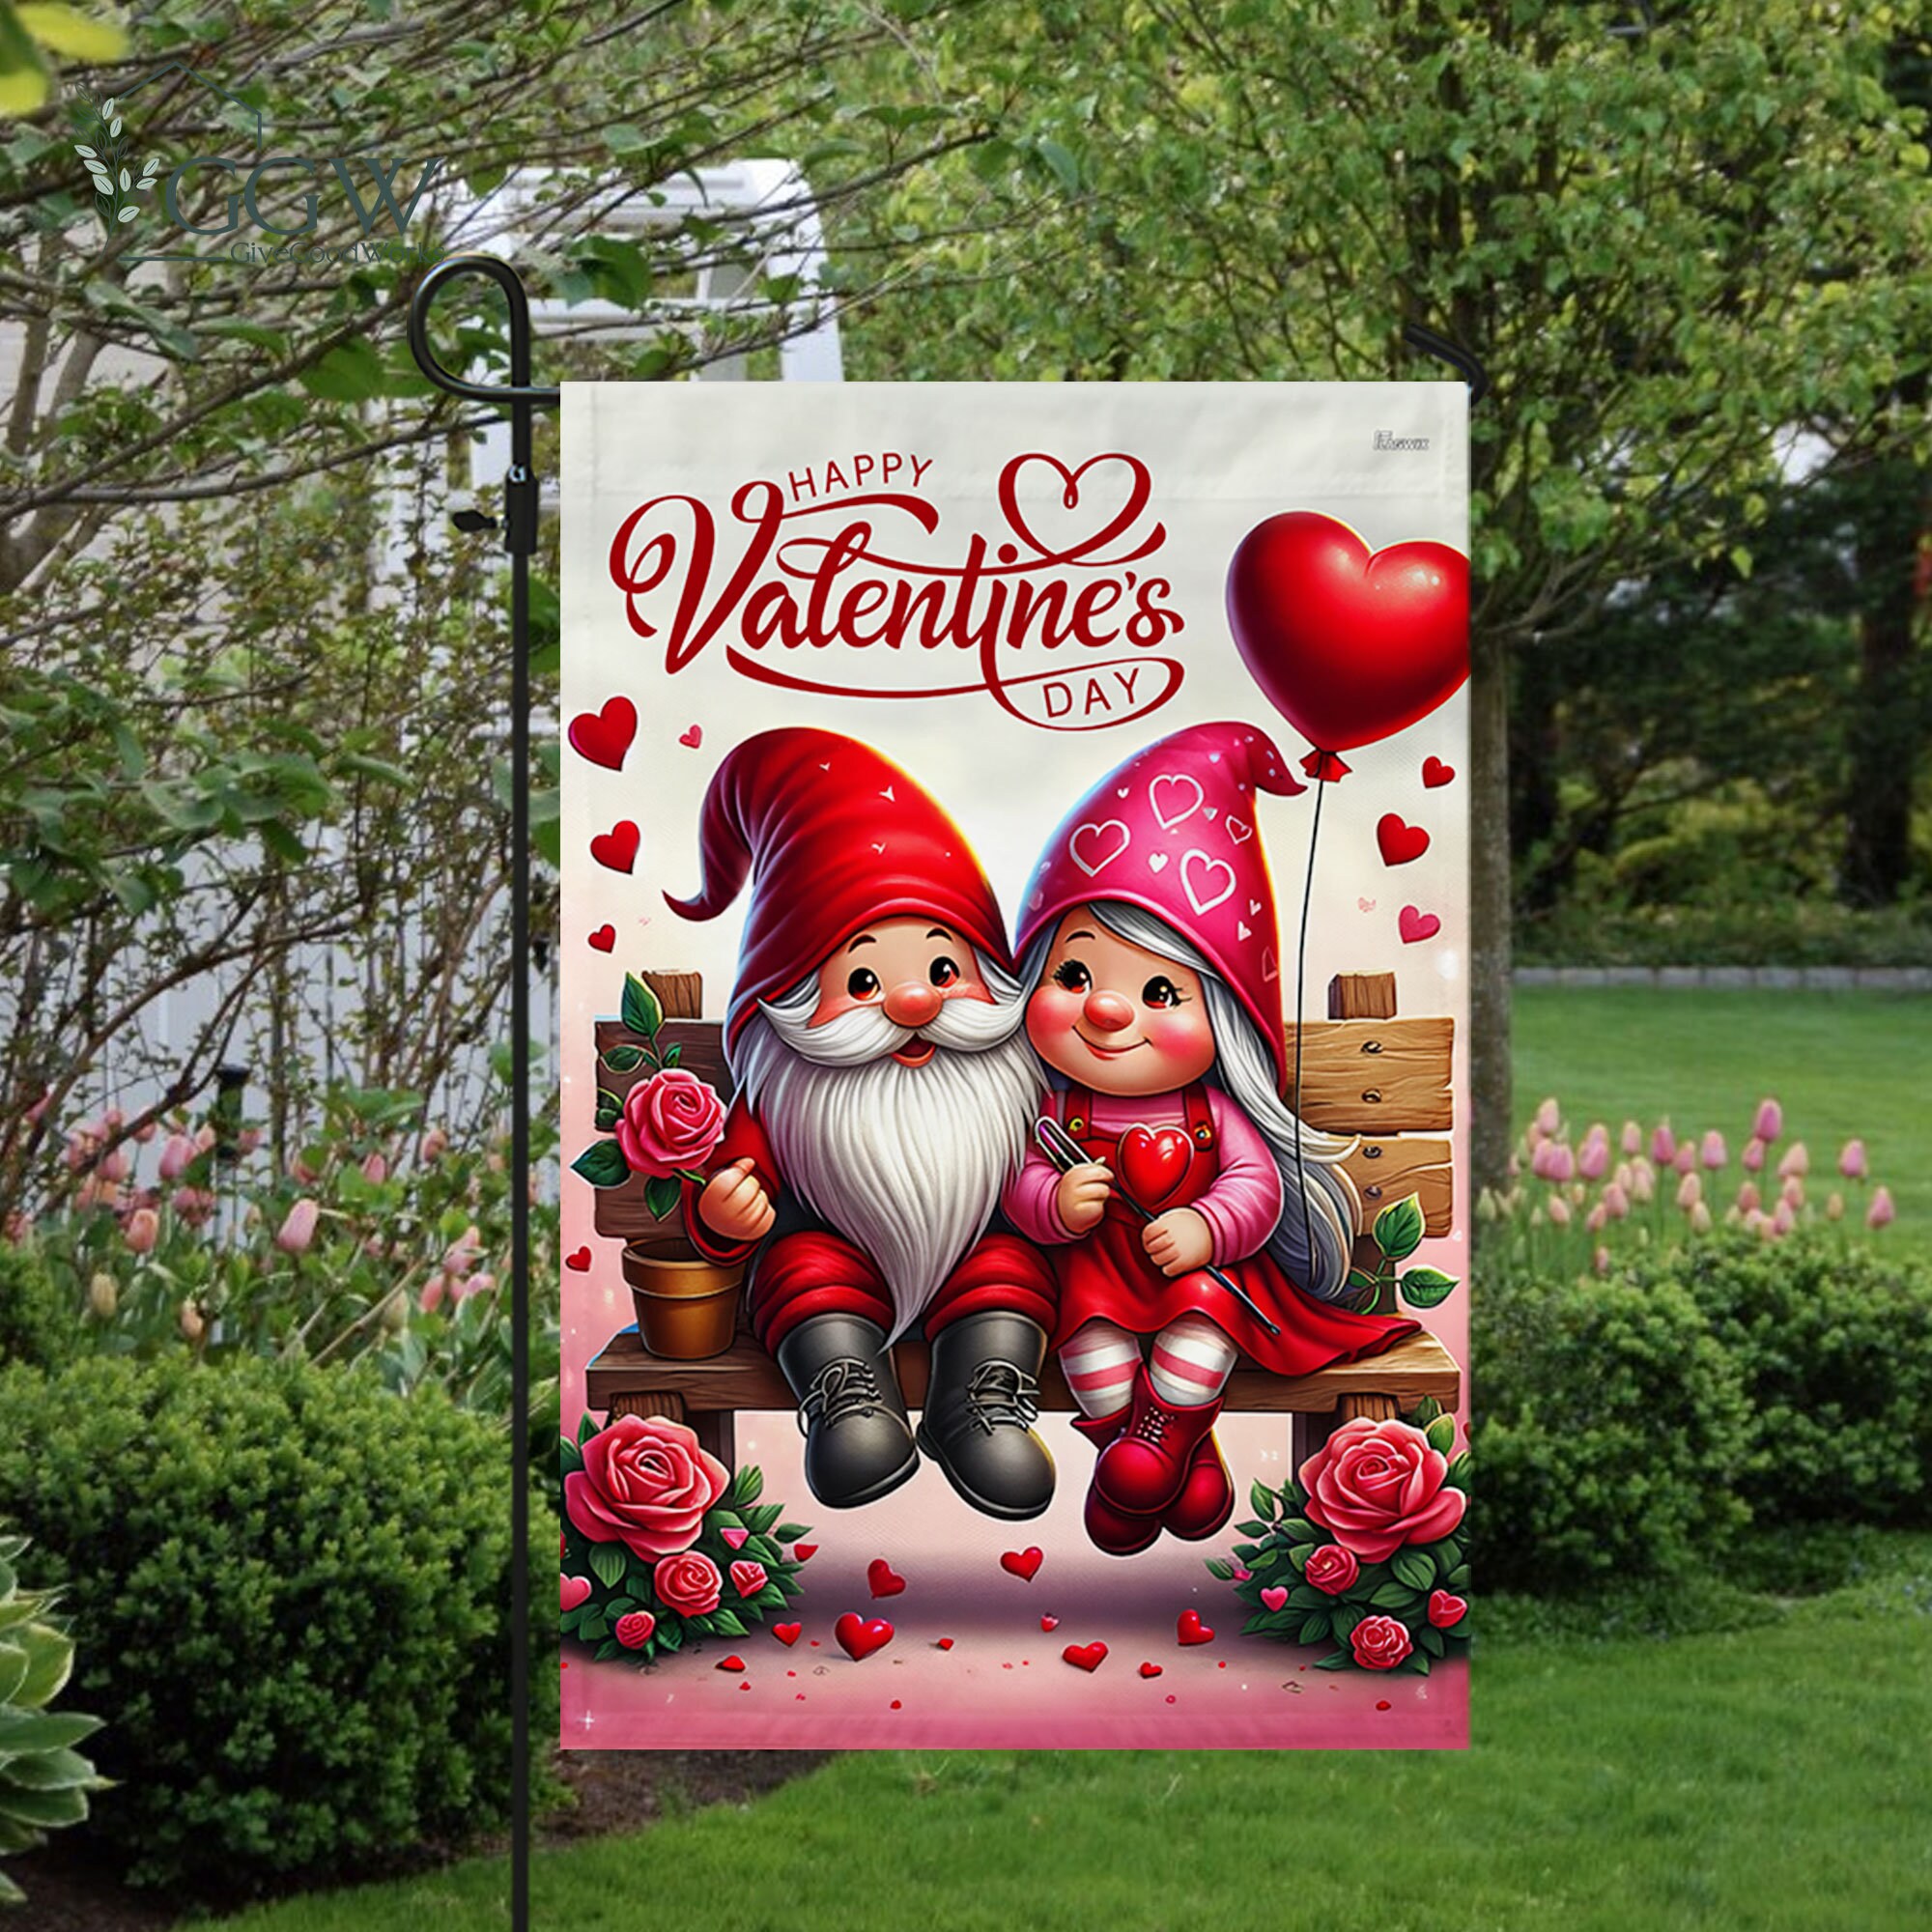 Discover Valentines Gnome Couple Flag, Couple Love Decor, Valentines Day Gift